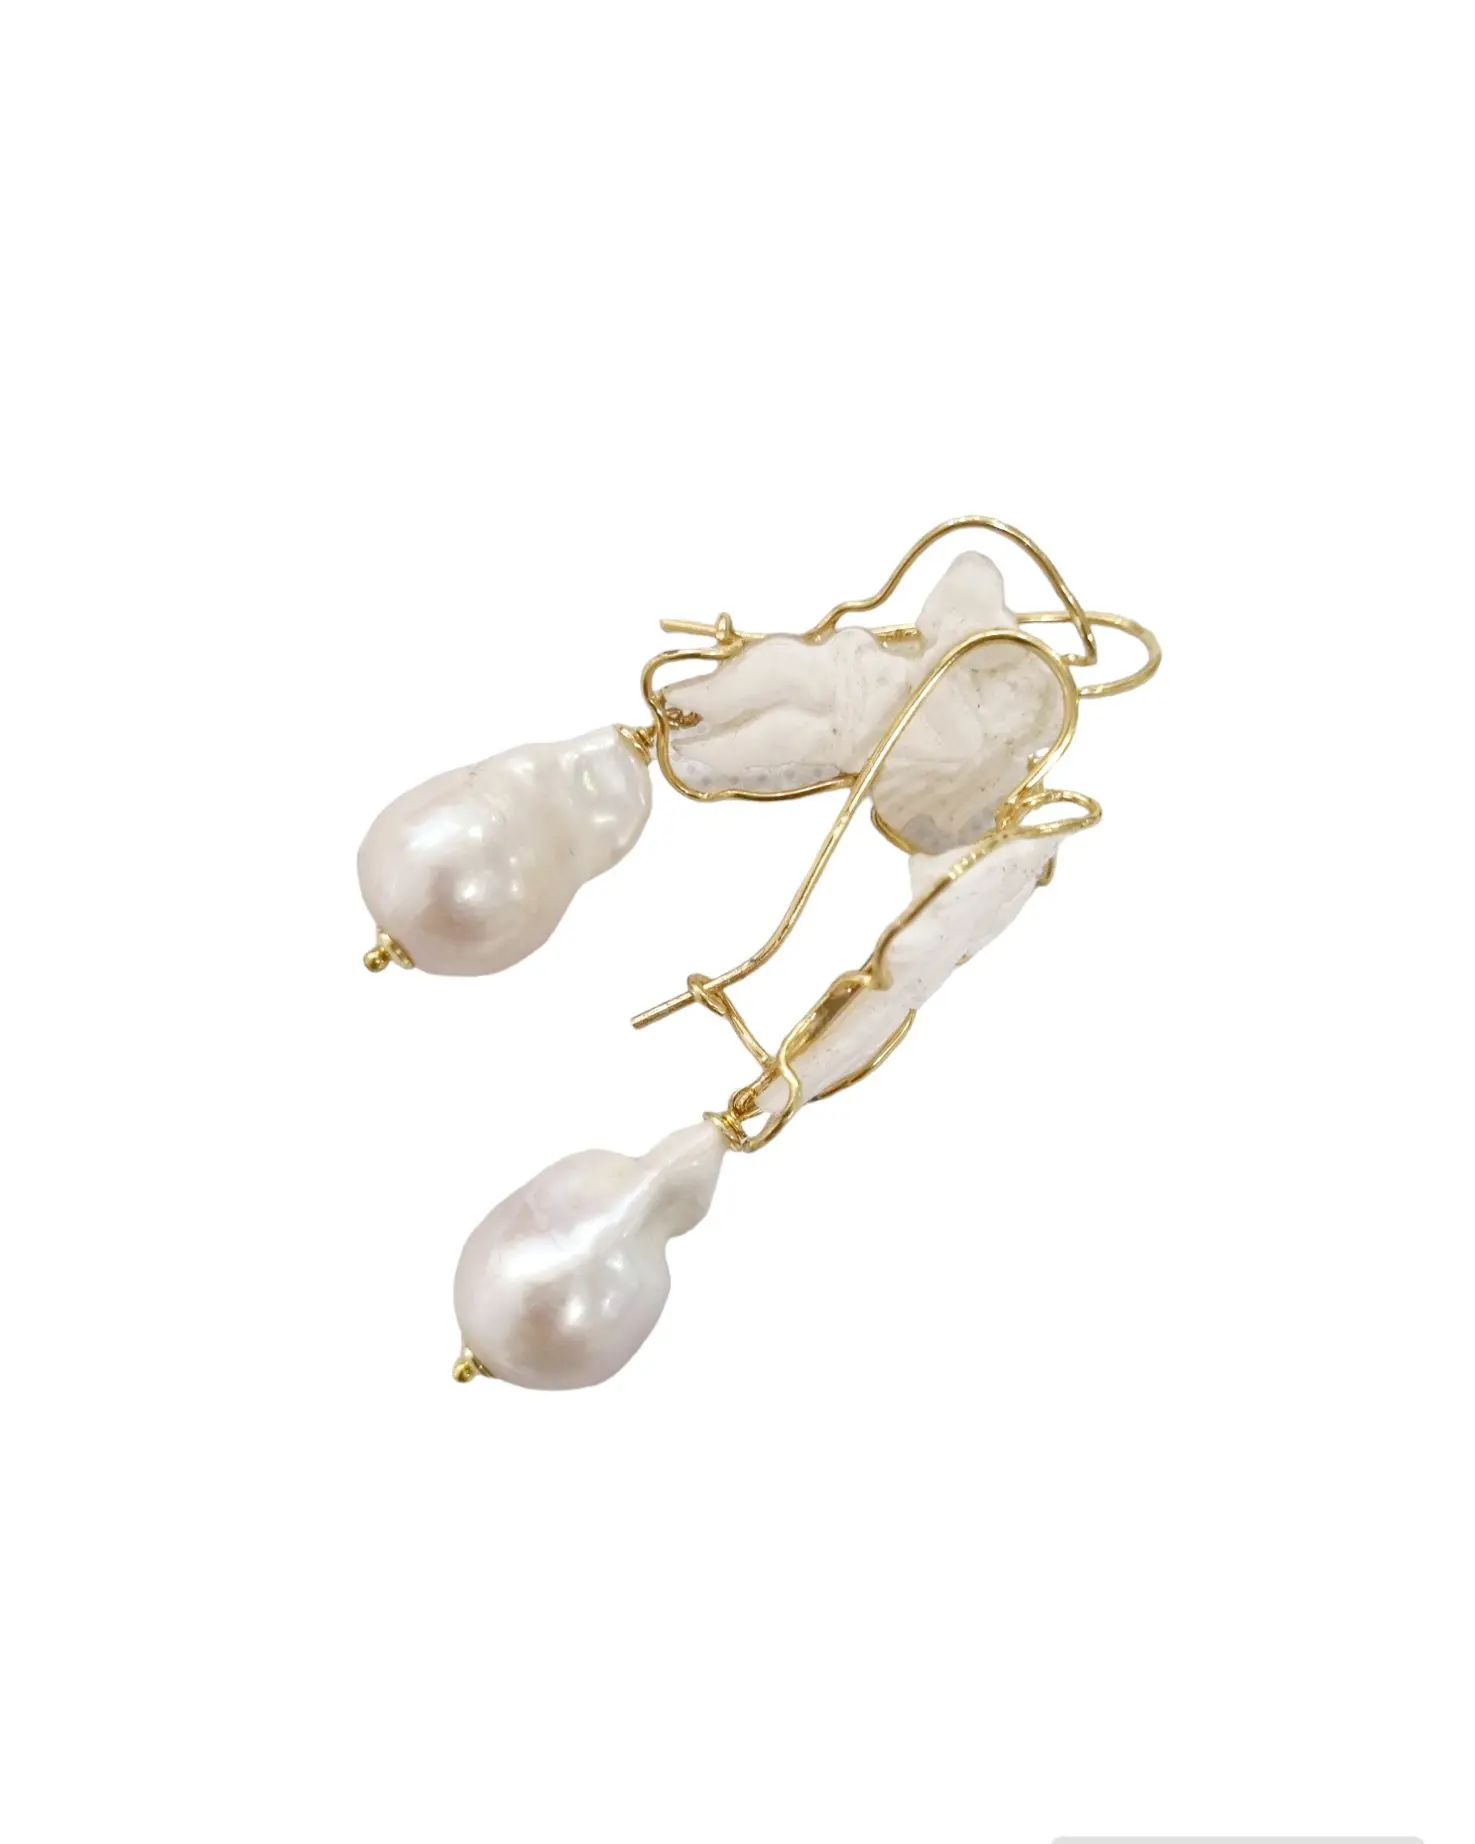 Earrings made with little angels sculpted on cameos mounted on gold-plated 925 silver and scaramzza pearl. 925 silver closed lever clasp. Length 6.5cm Weight 10g